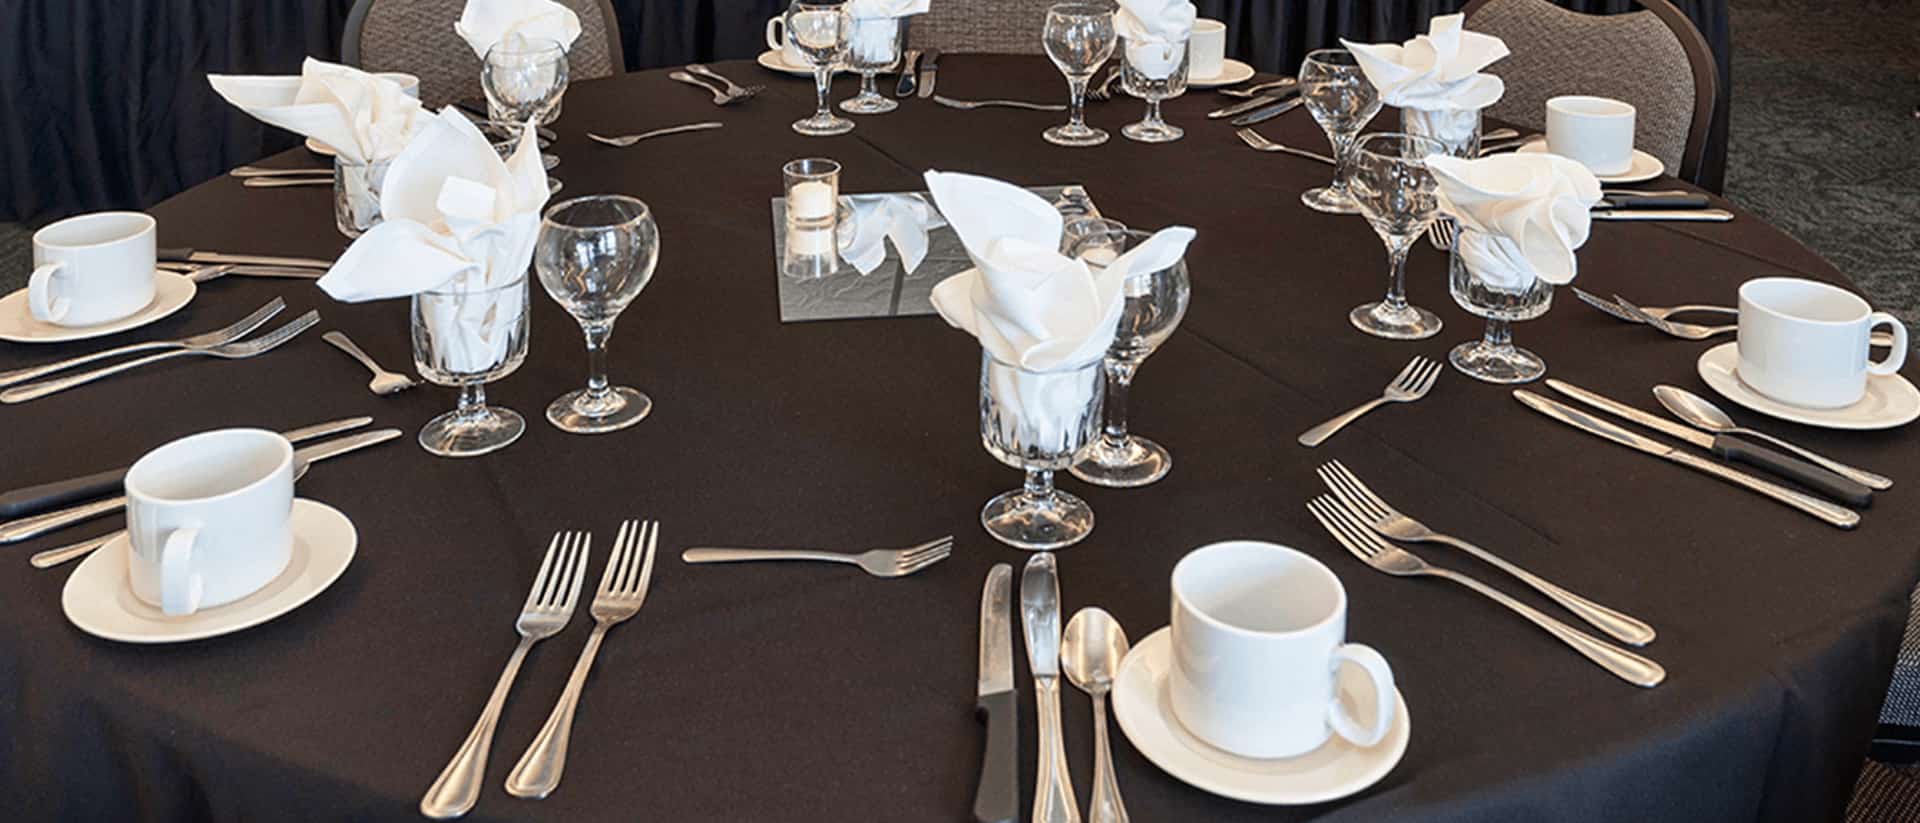 a round table is set with coffee cups, forks, knives and spoons